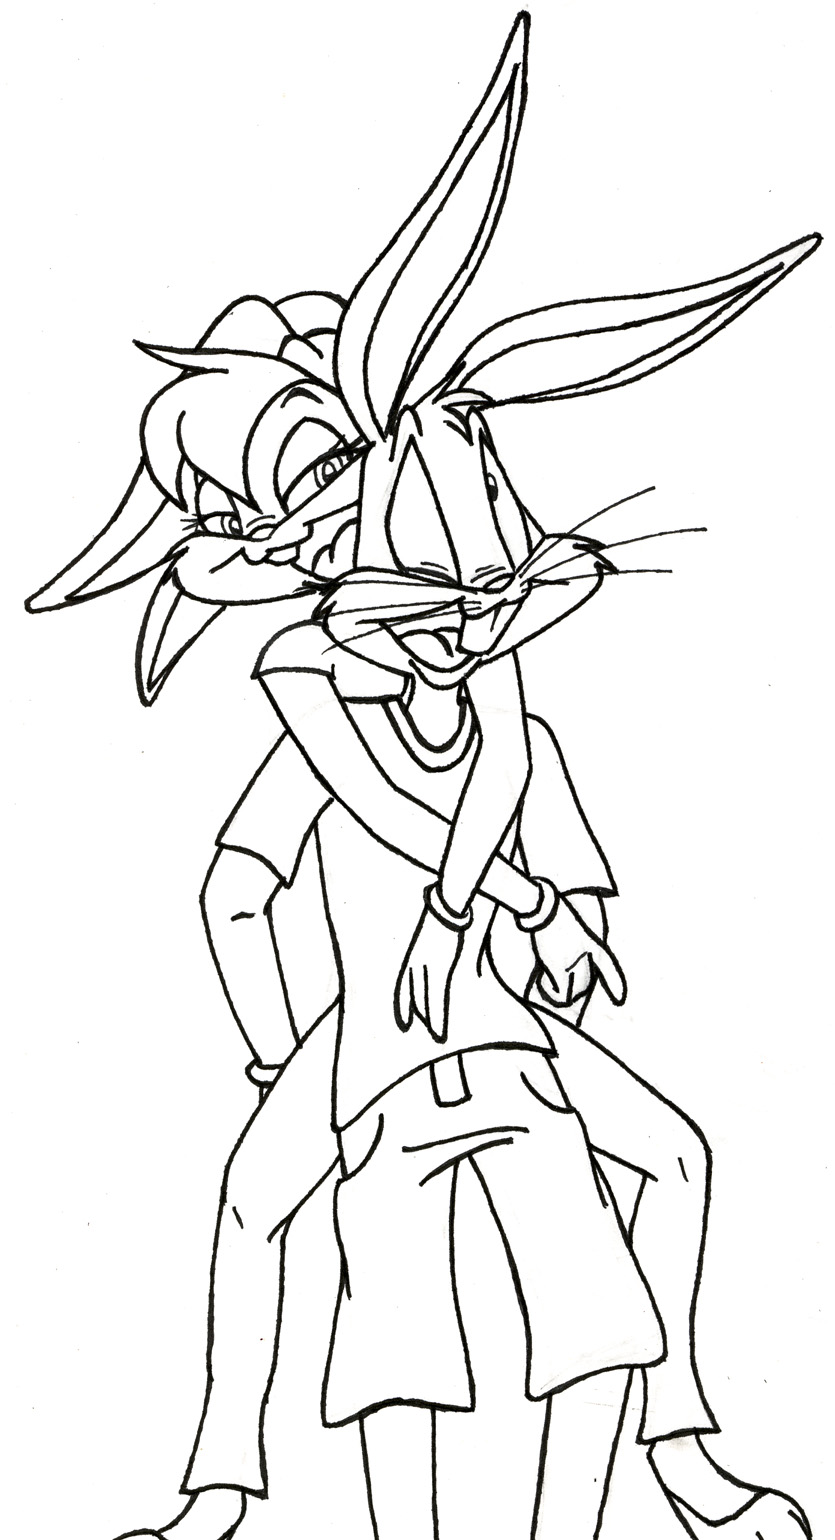 Free Printable Bugs Bunny Coloring Pages For Kids